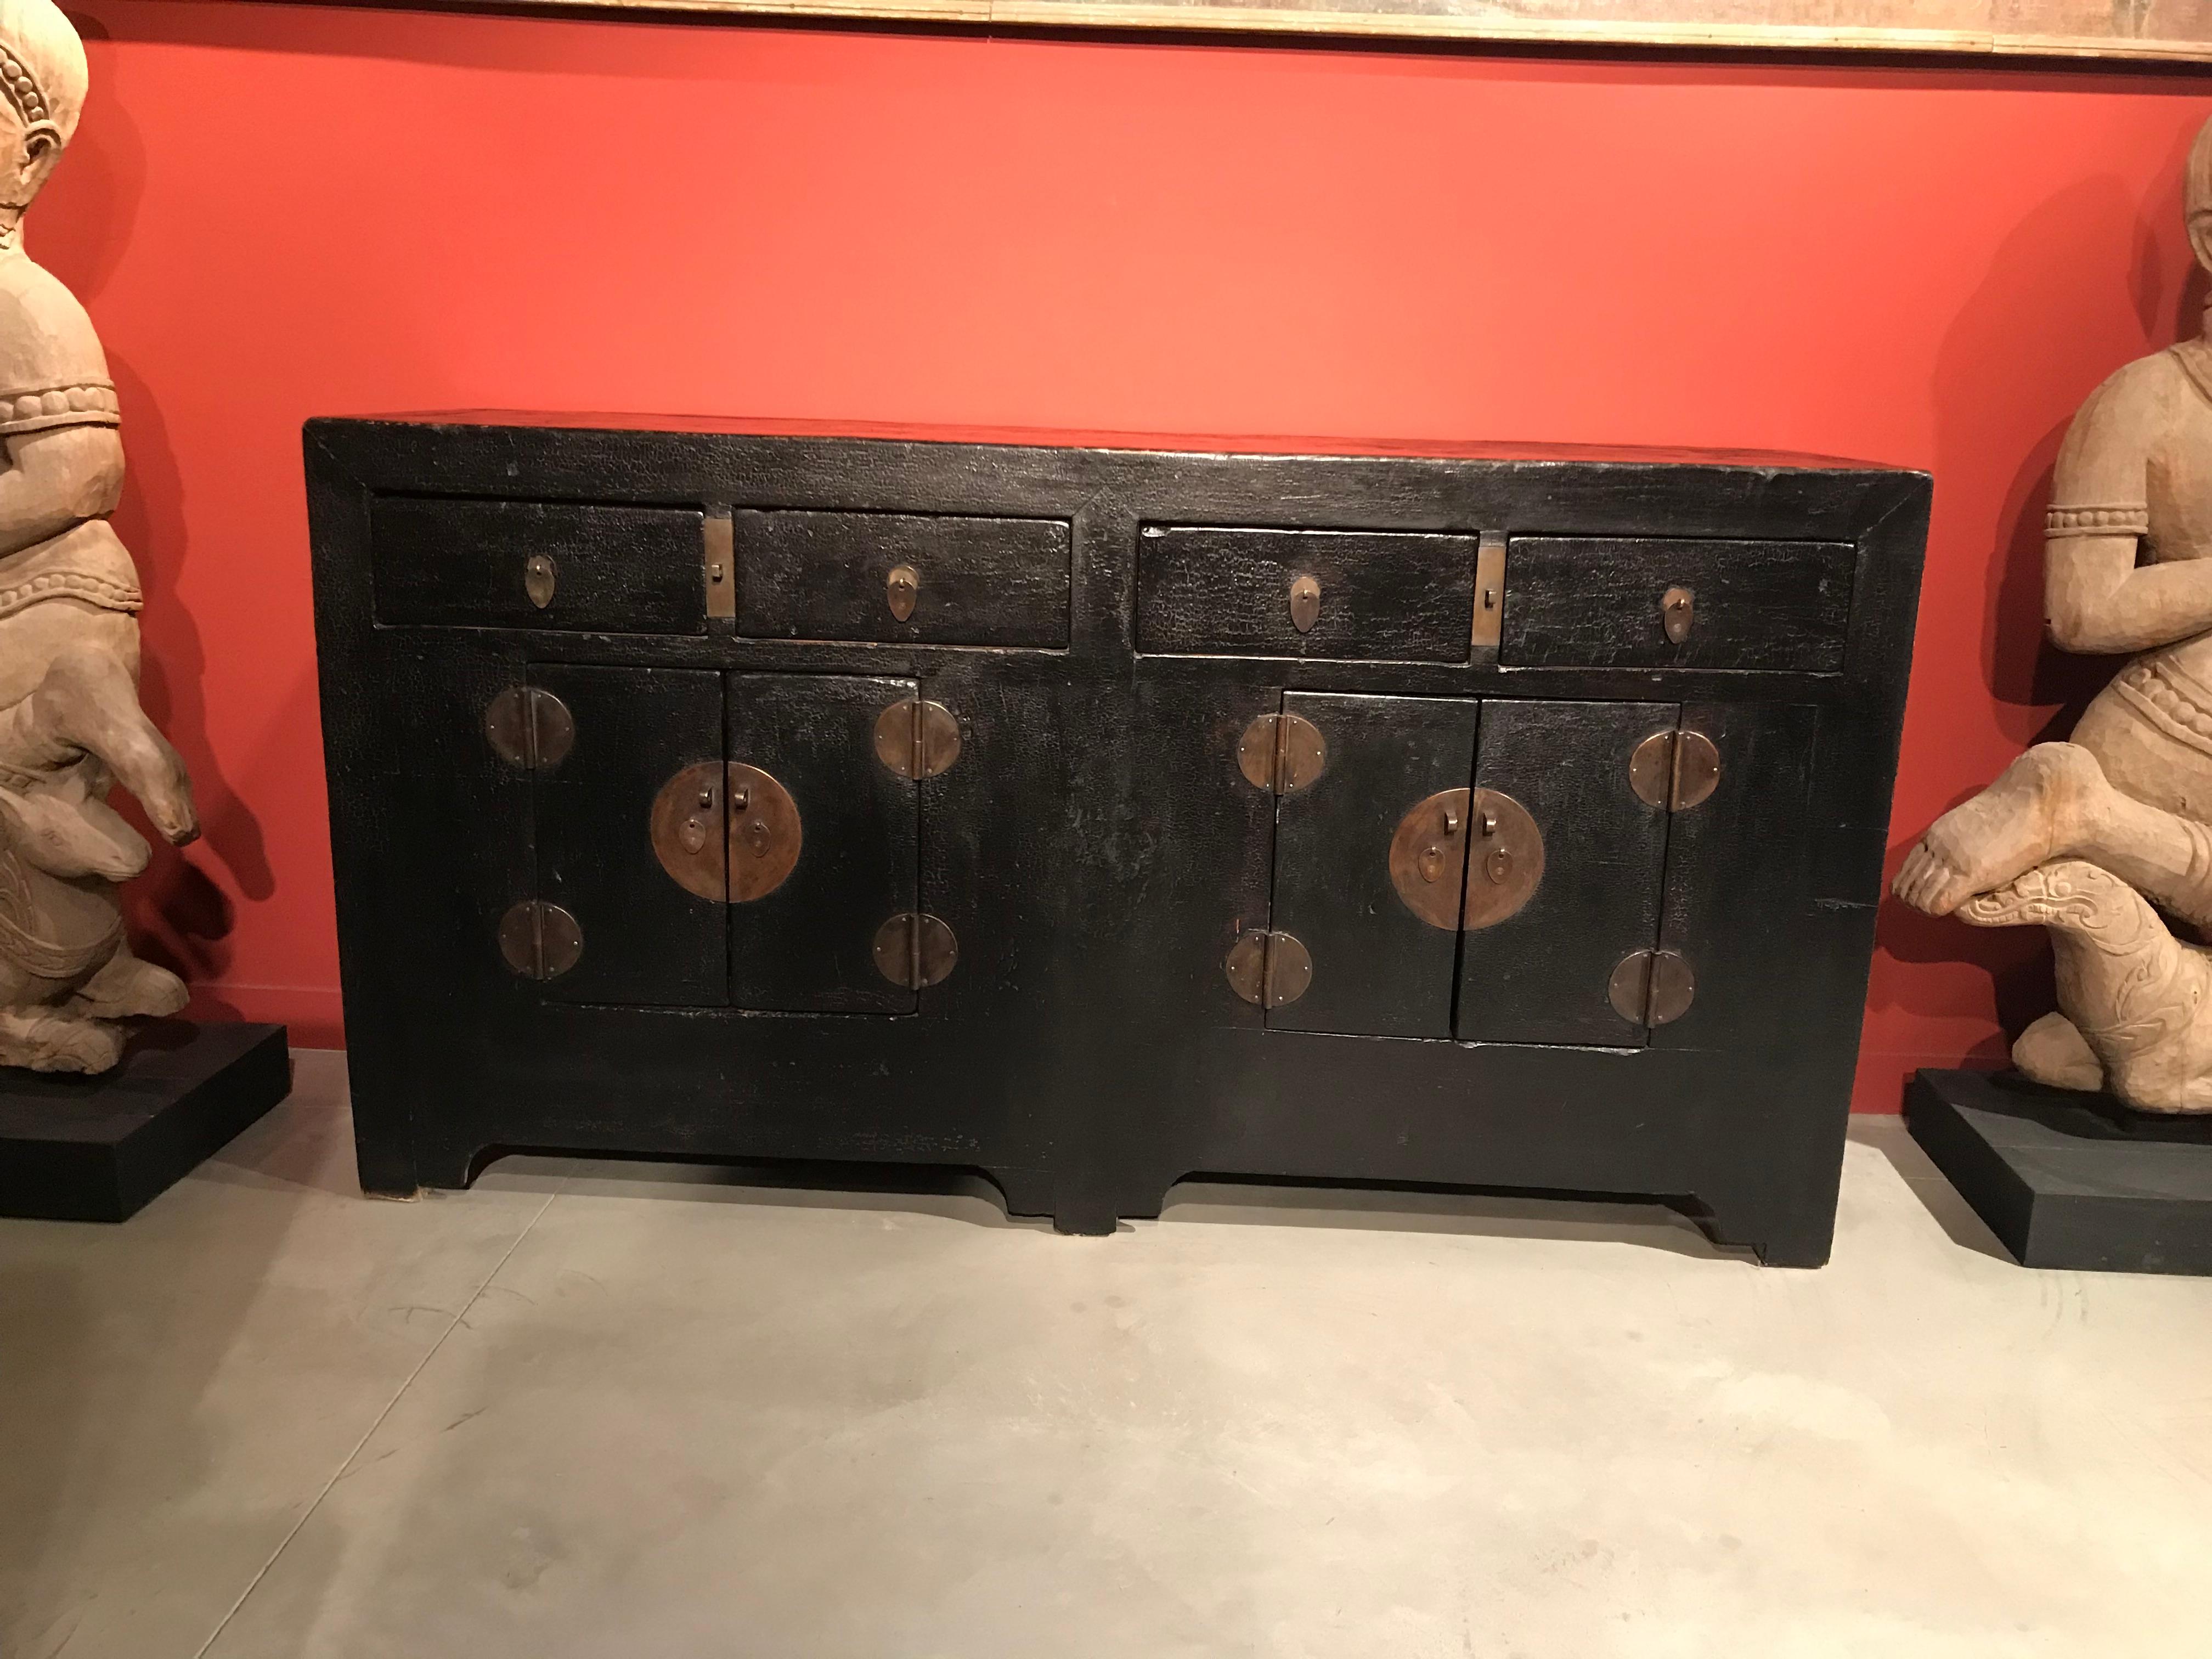 A classic antique Chinese sideboard with original hardware and plenty of storage space. A beautiful and practical piece. From Shanxi Province.
Dimensions: L: 70